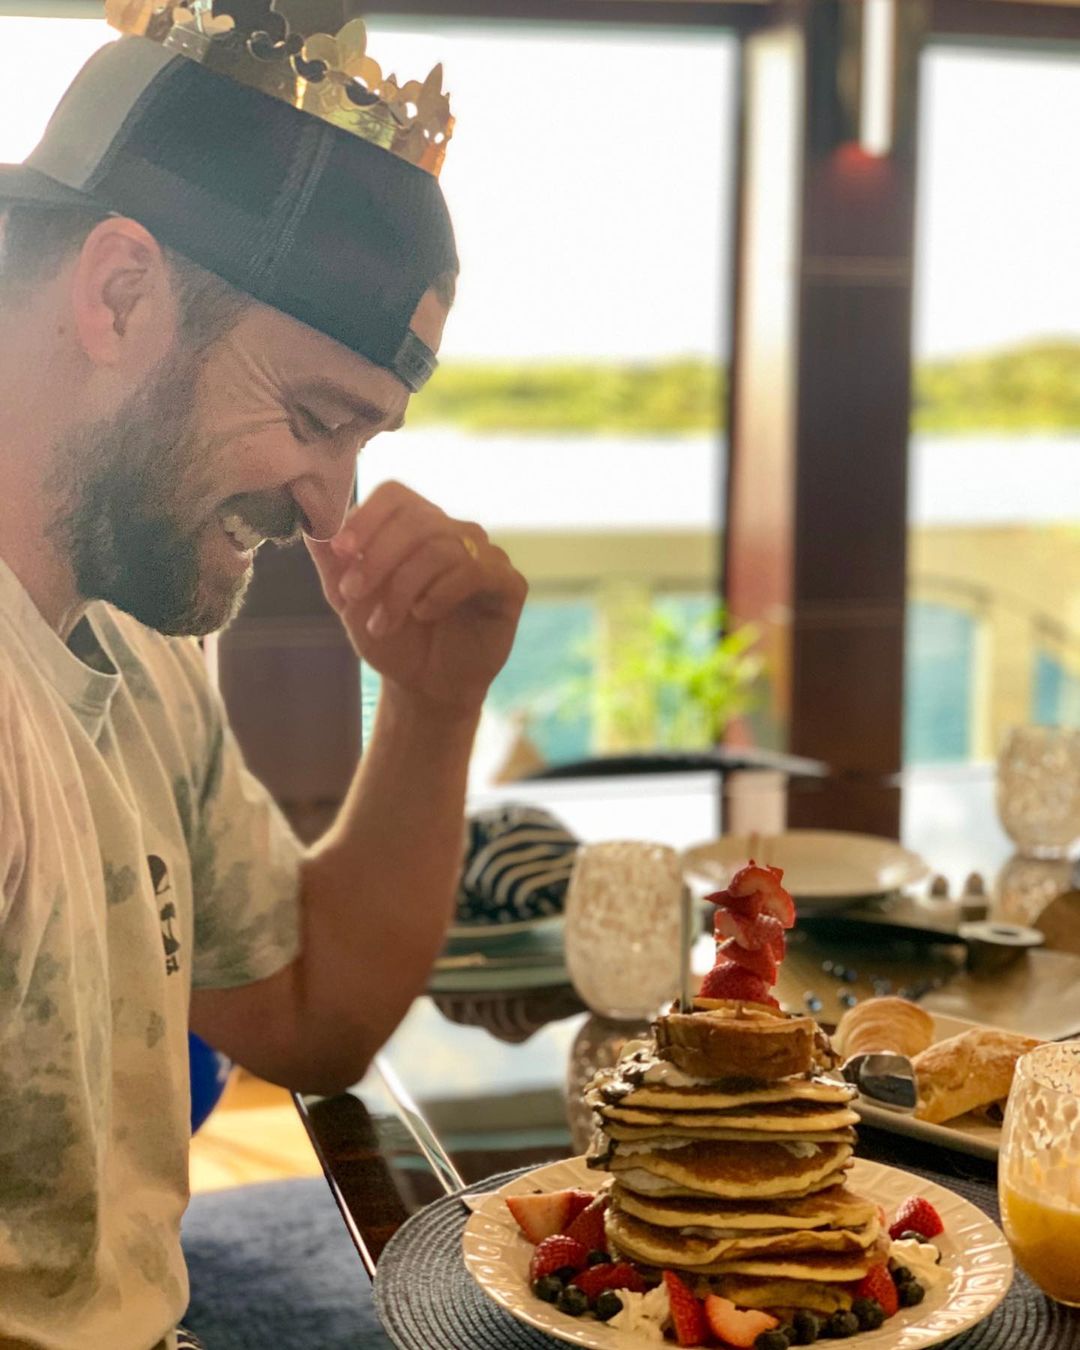 A picture of Justin Timberlake staring at a plate of piled pancakes, with strawberries and blueberries around it, with a smile on his face.